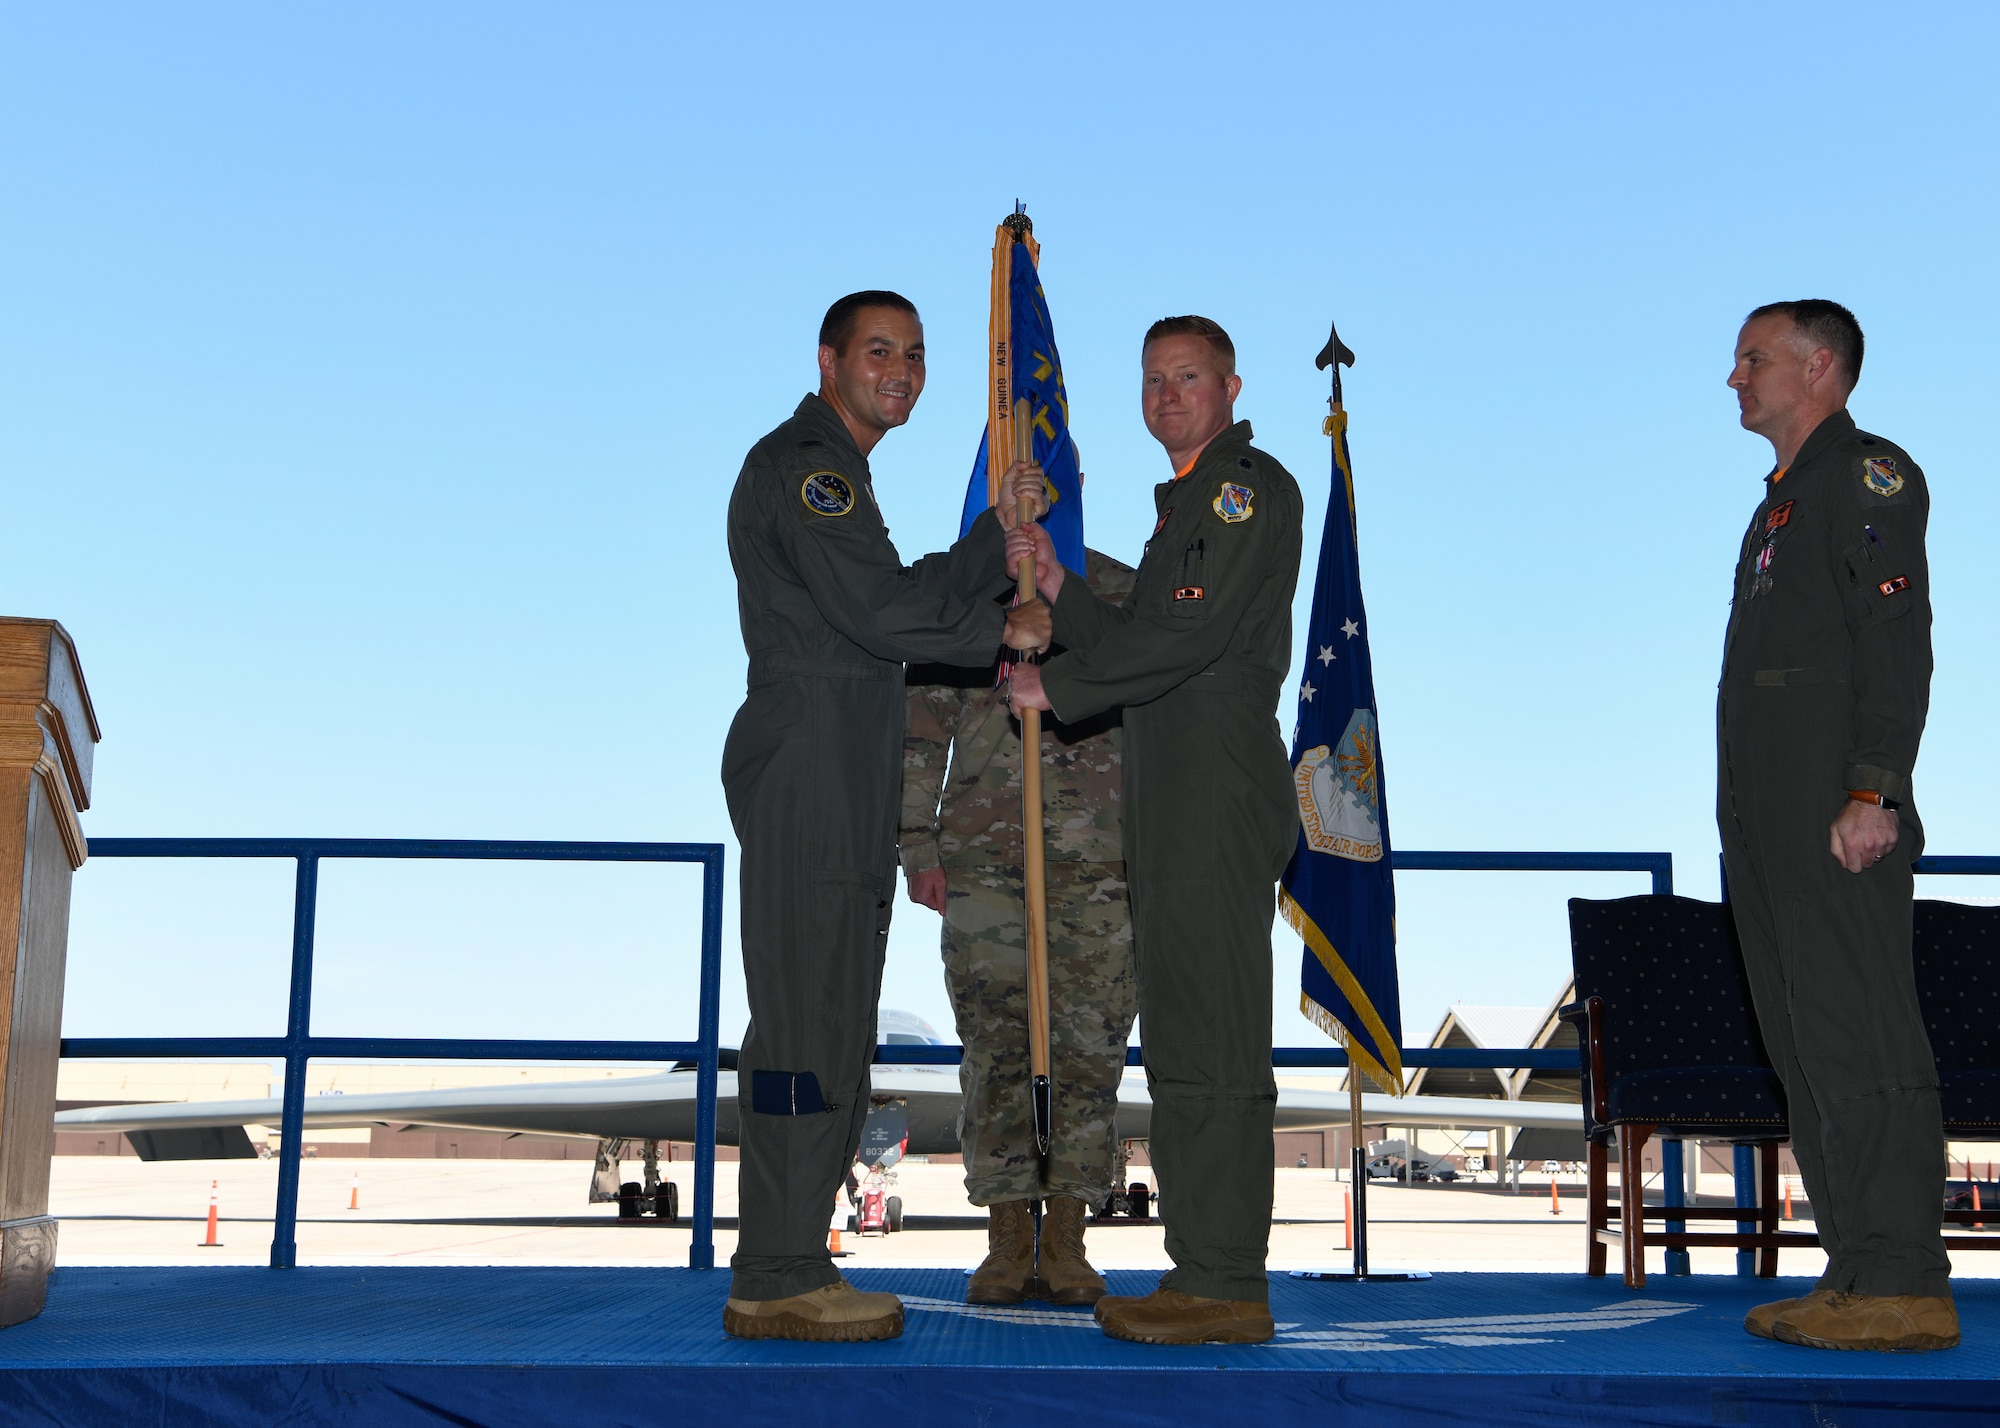 Lt. Col. Aaron Young assumes command of the 72nd Test and Evaluation Squadron.